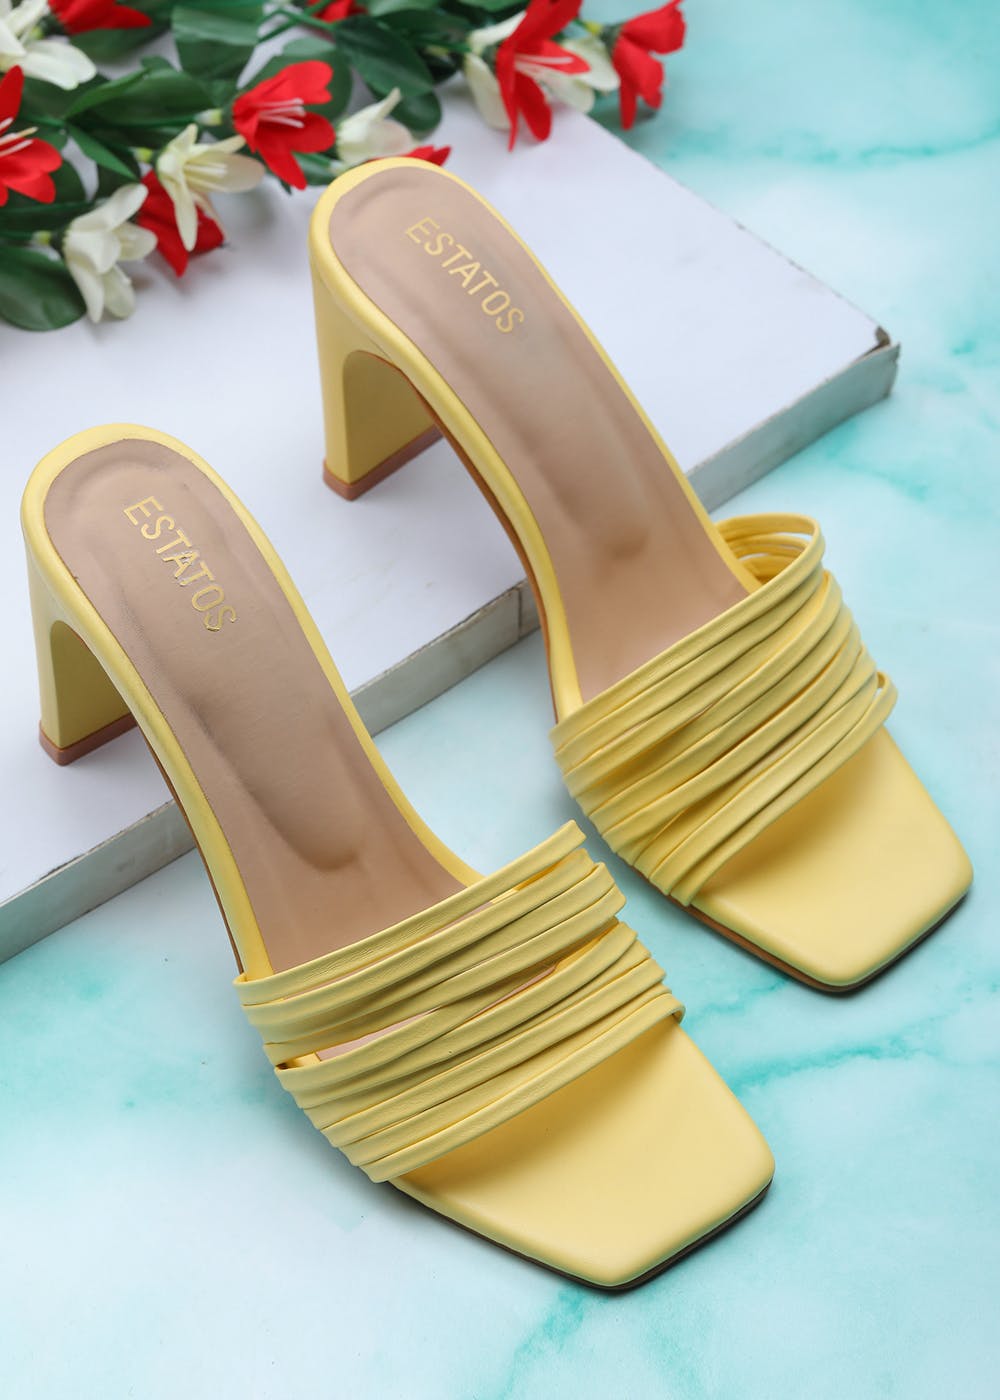 Designer Cowhide Leather Suede Half High Heel Slippers With Thick Heels And  Metal Detailing Perfect For Beach, Lazy Days And More! Available In Large  Sizes 35 42. US S US10. From Feng520yao,